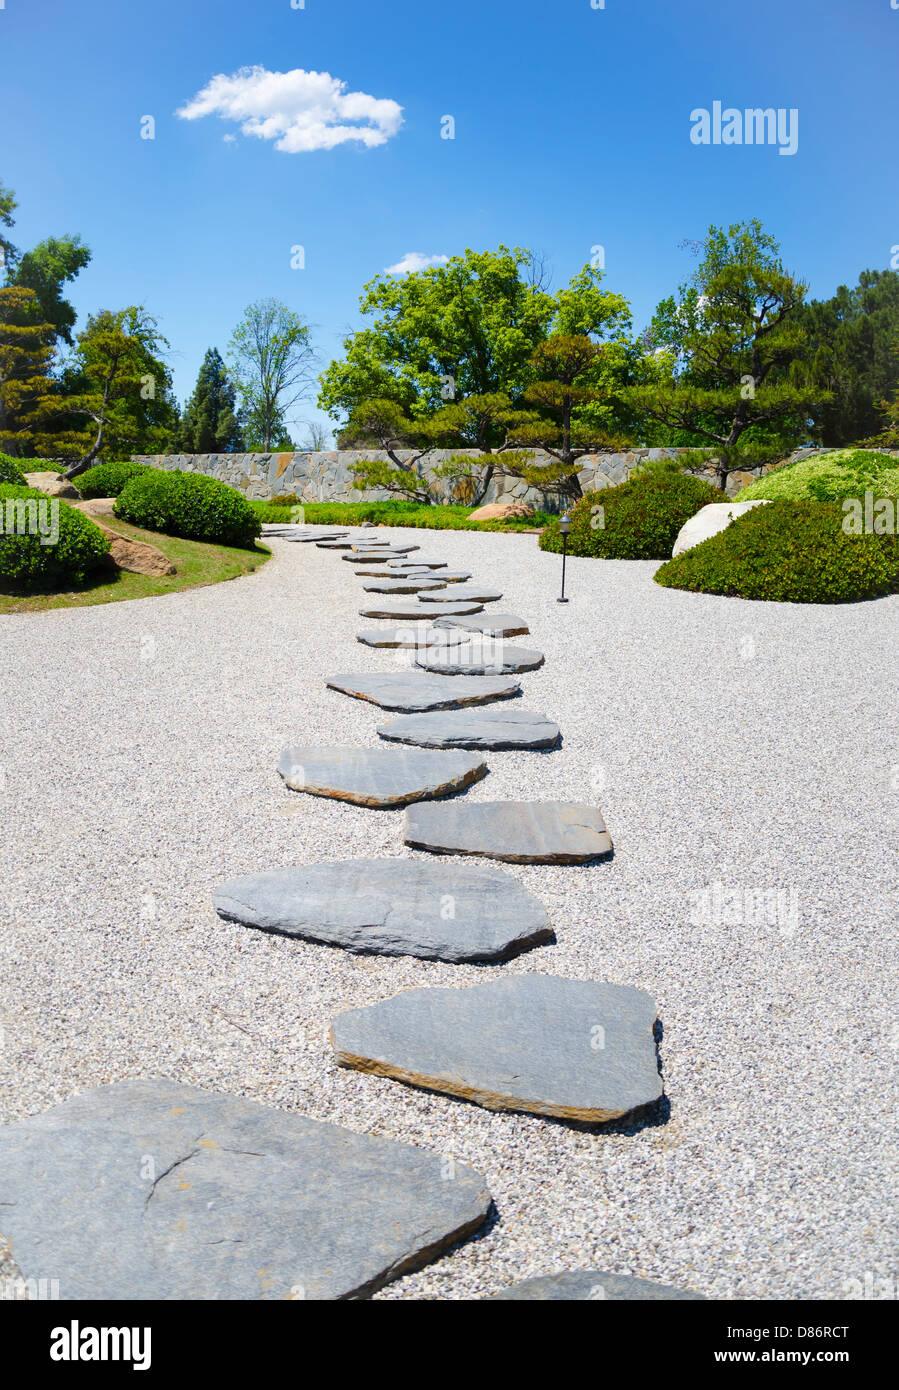 Stone's way in the Japanese garden in sunny day Stock Photo